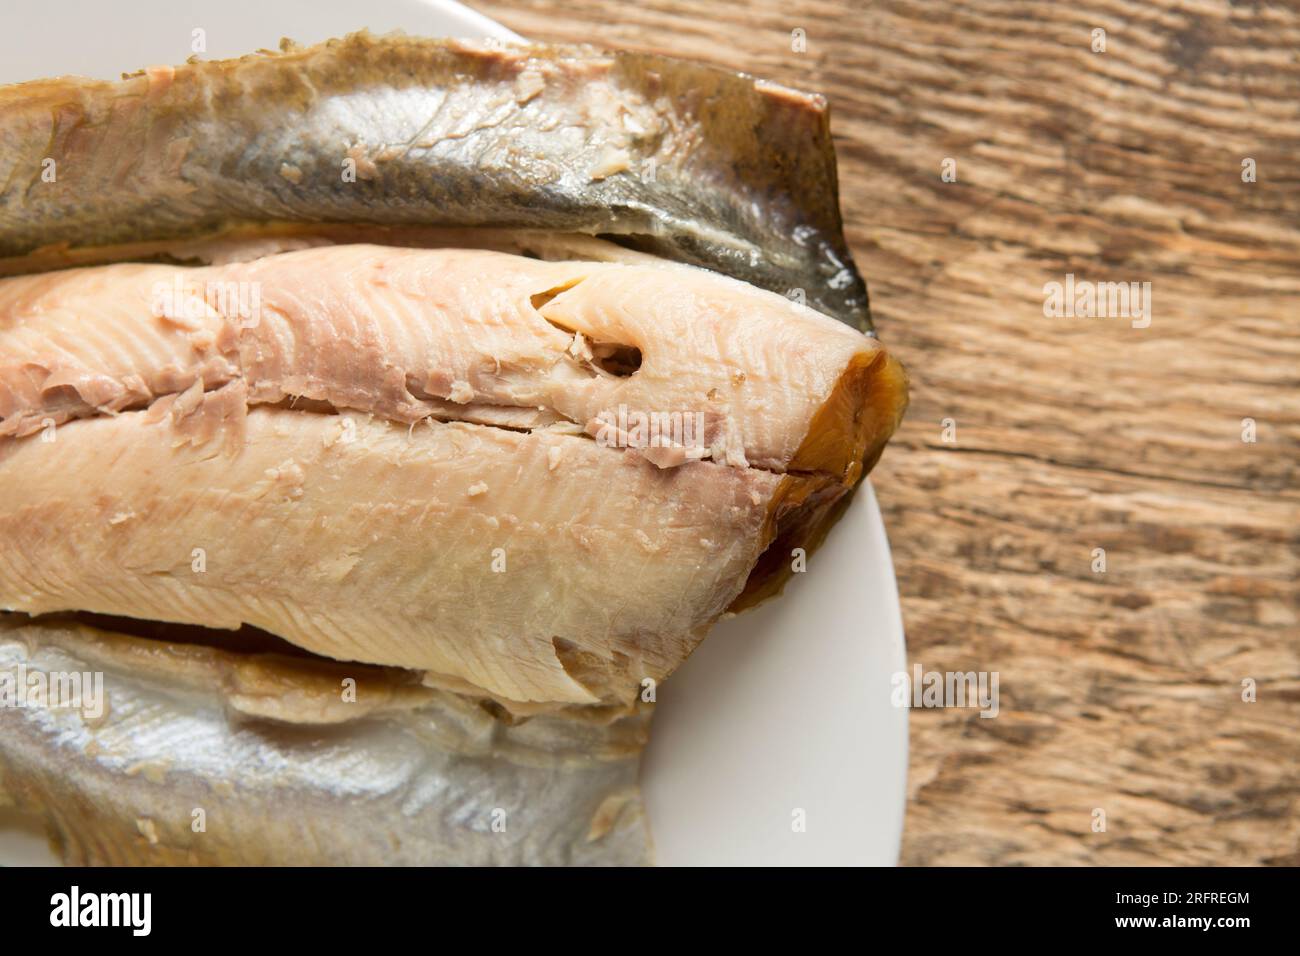 Hot smoked rainbow trout, Oncoryhnchus mykiss, served with a horseradish and beetroot sauce, lamb’s lettuce salad and sliced lemon. England UK GB Stock Photo